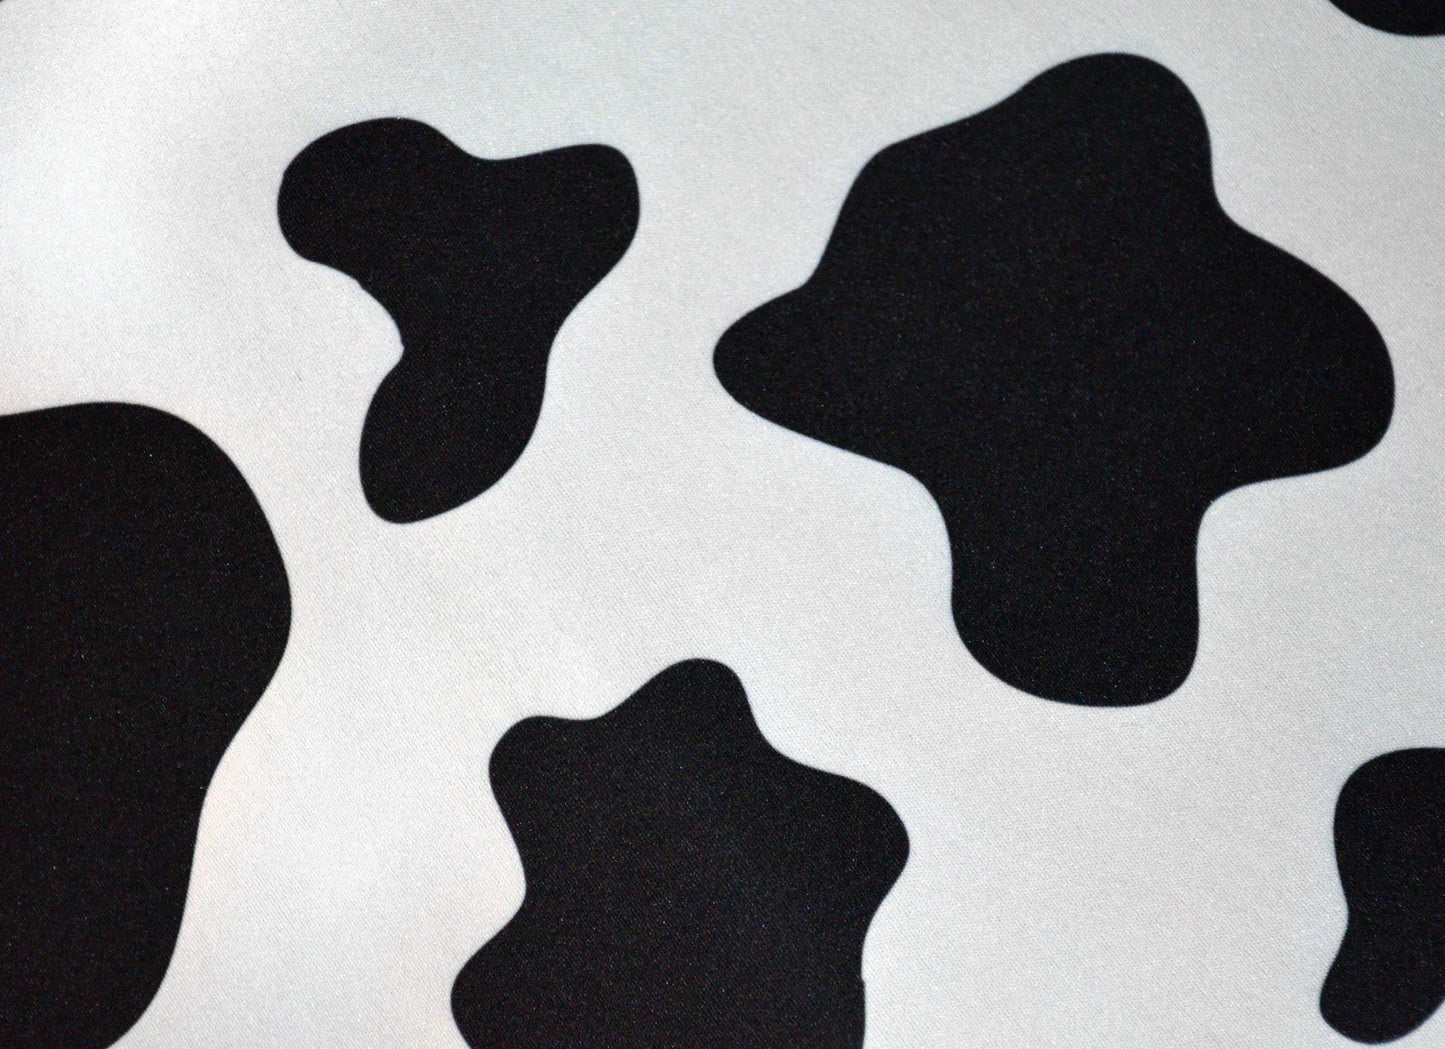 2mm Cow Print Neoprene Fabric Wetsuit Material For Sewing